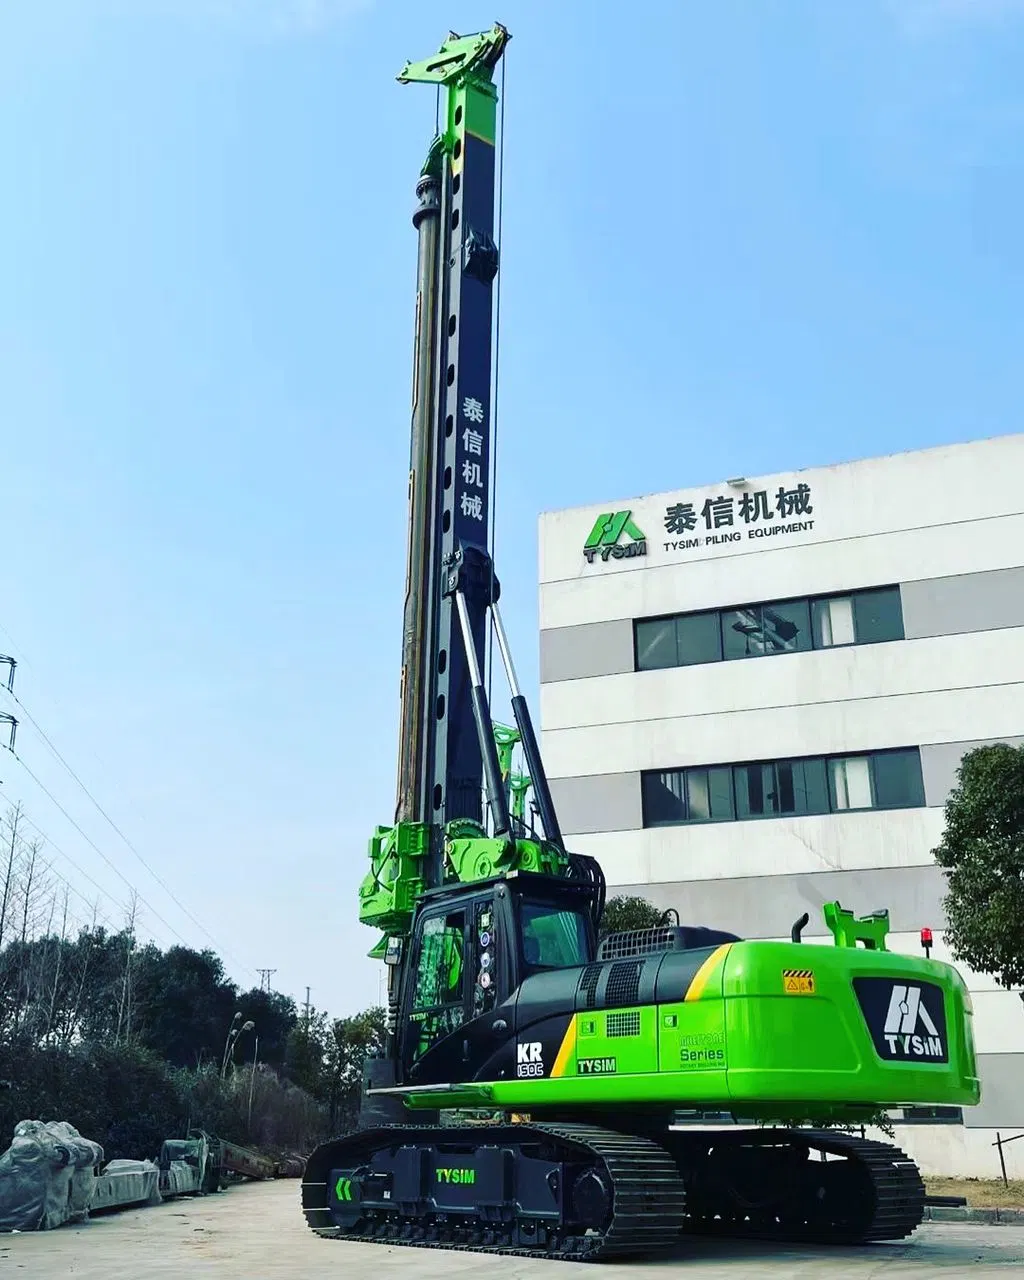 Drilling Rig Augersrock Auger Drillhand Tool Auger Drilltransport Width 3000 Mmdrilling Bucket Core Barrel with Auger Teethfoundation Drilling Rock Auger